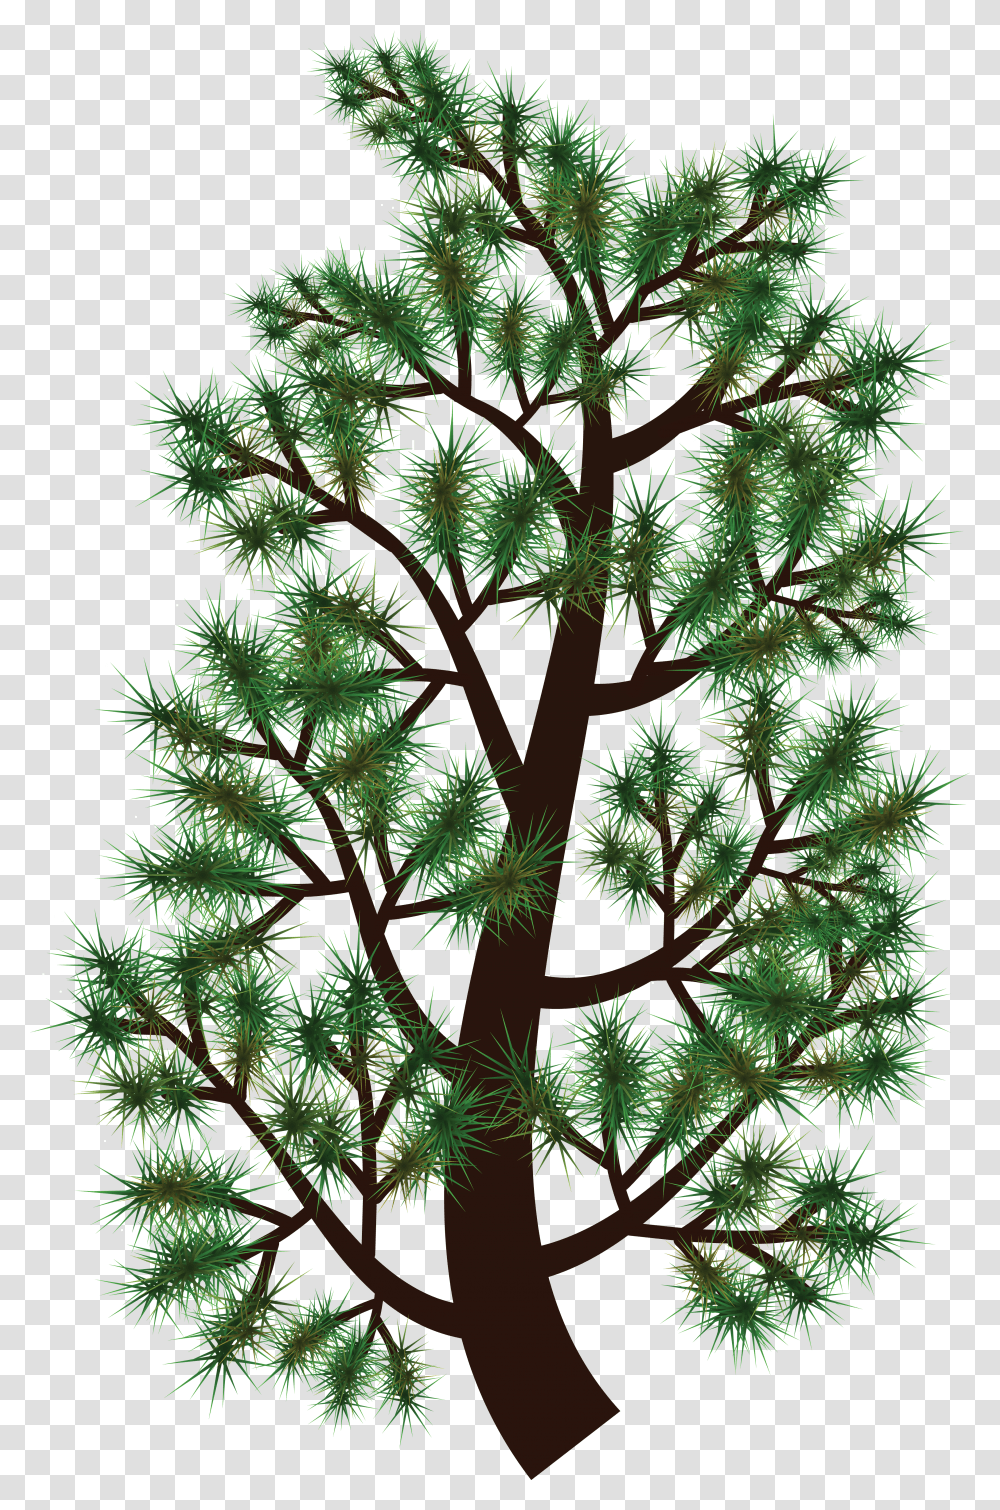 Free Clipart Of A Pine Tree Branch Clip Art Transparent Png